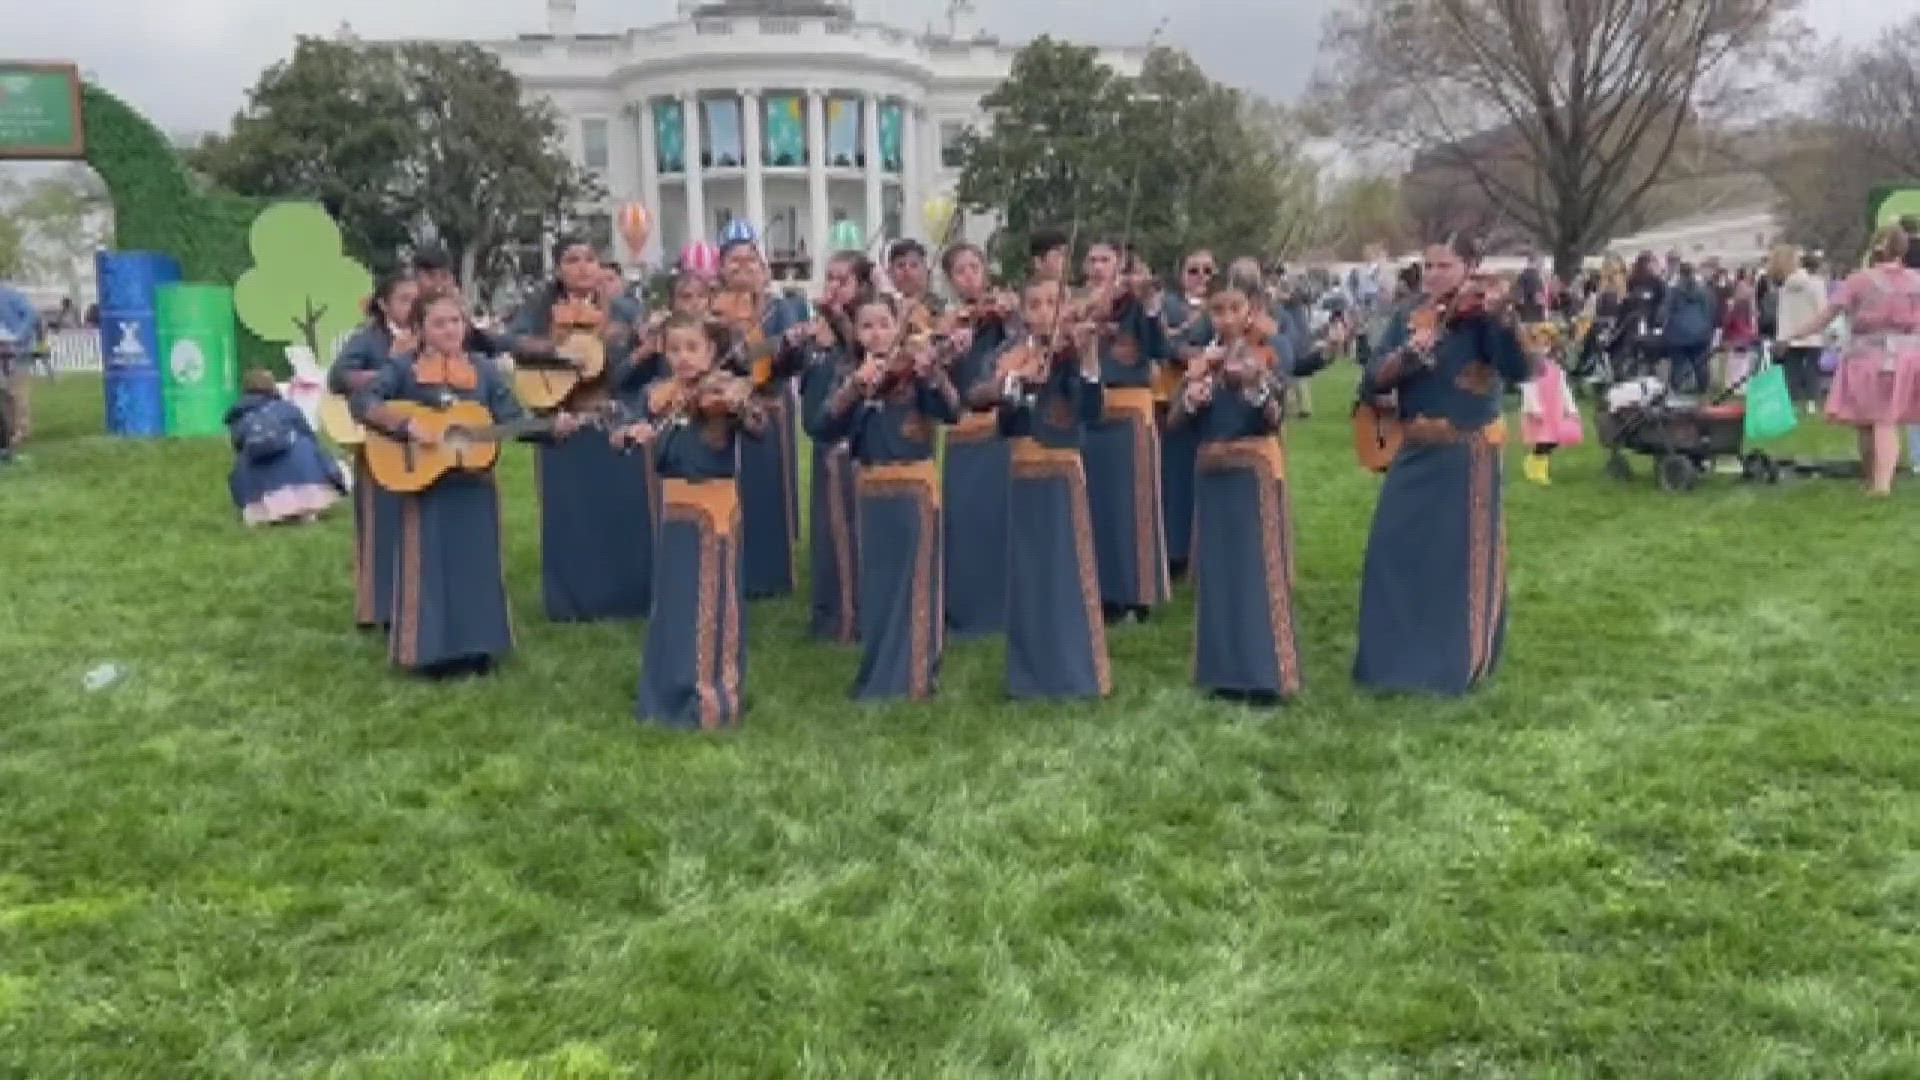 The Tolleson elementary school was invited to perform at the one and only White House!